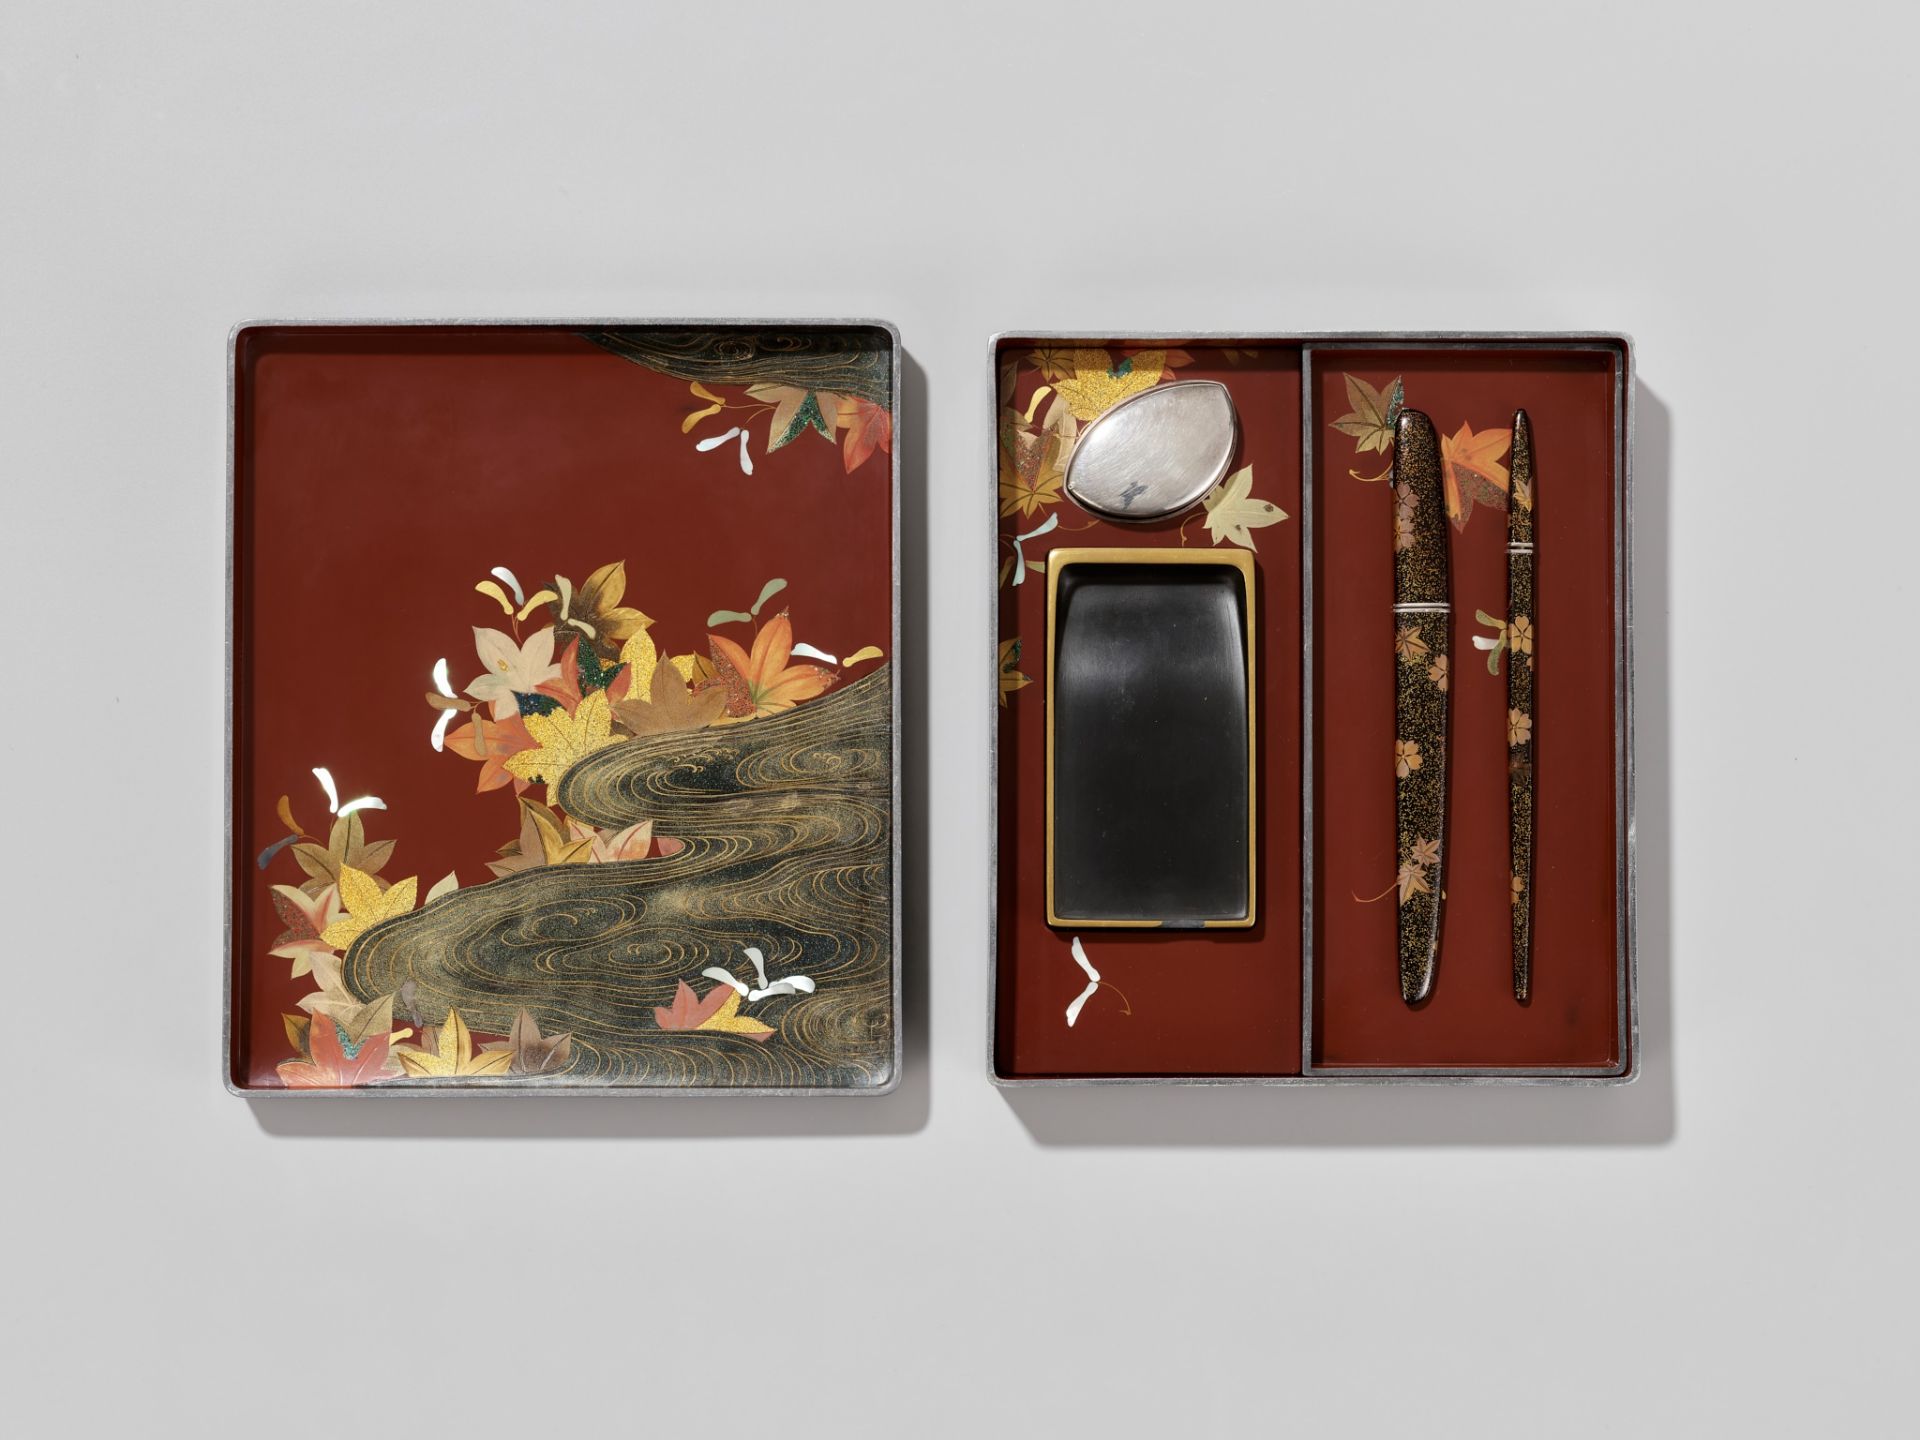 A LACQUER SUZURIBAKOO DEPICTING BLOSSOMING BELLFLOWERS (KIKYO) AND MAPLE LEAVES - Image 2 of 9